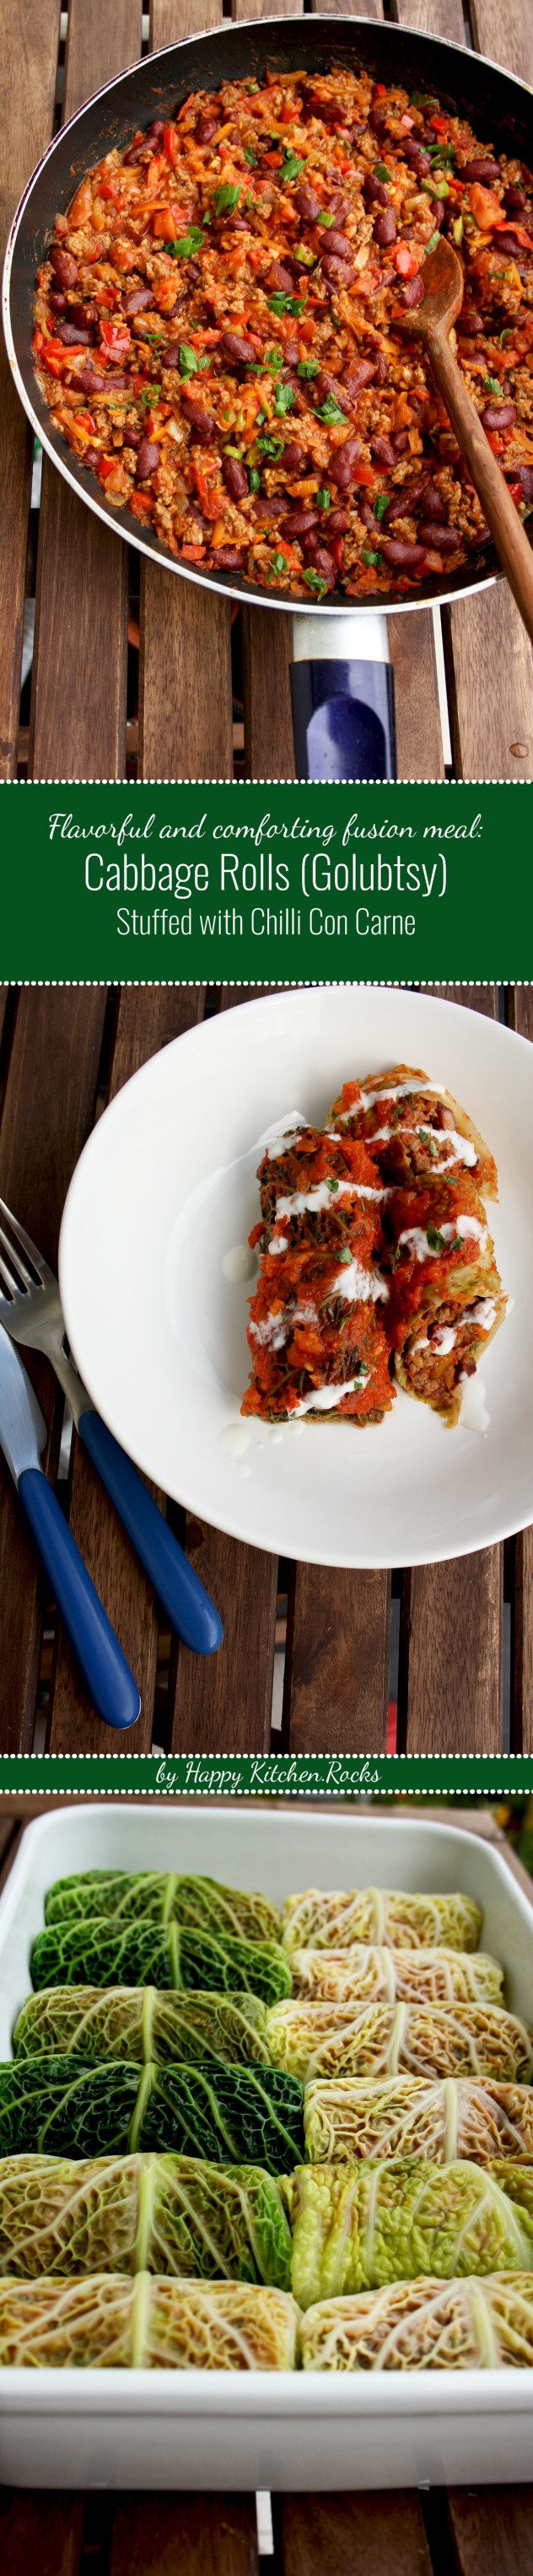 Mouthwatering, wholesome, flavorful and comforting fusion of Russian and American cuisine: Cabbage Rolls (Golubtsy) Stuffed with Chilli Con Carne. Great as a gluten-free make-ahead seasonal meal!